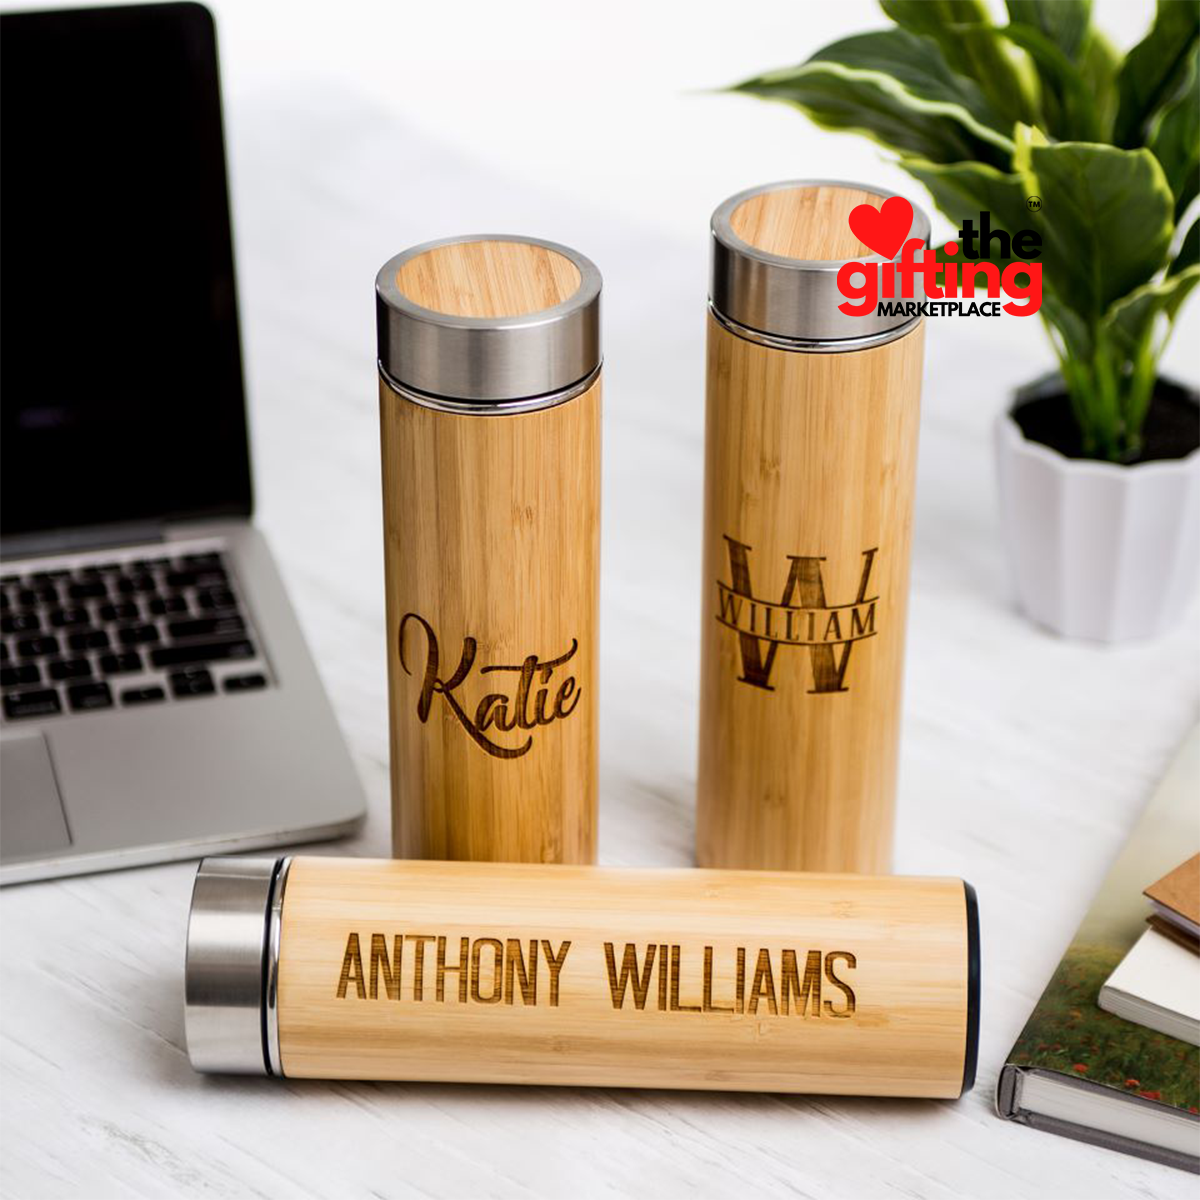 Personalized Engraved Insulated Double Wall Bamboo Water Bottle - For Return Gift, Corporate Gifting, Office or Personal Use HK10234